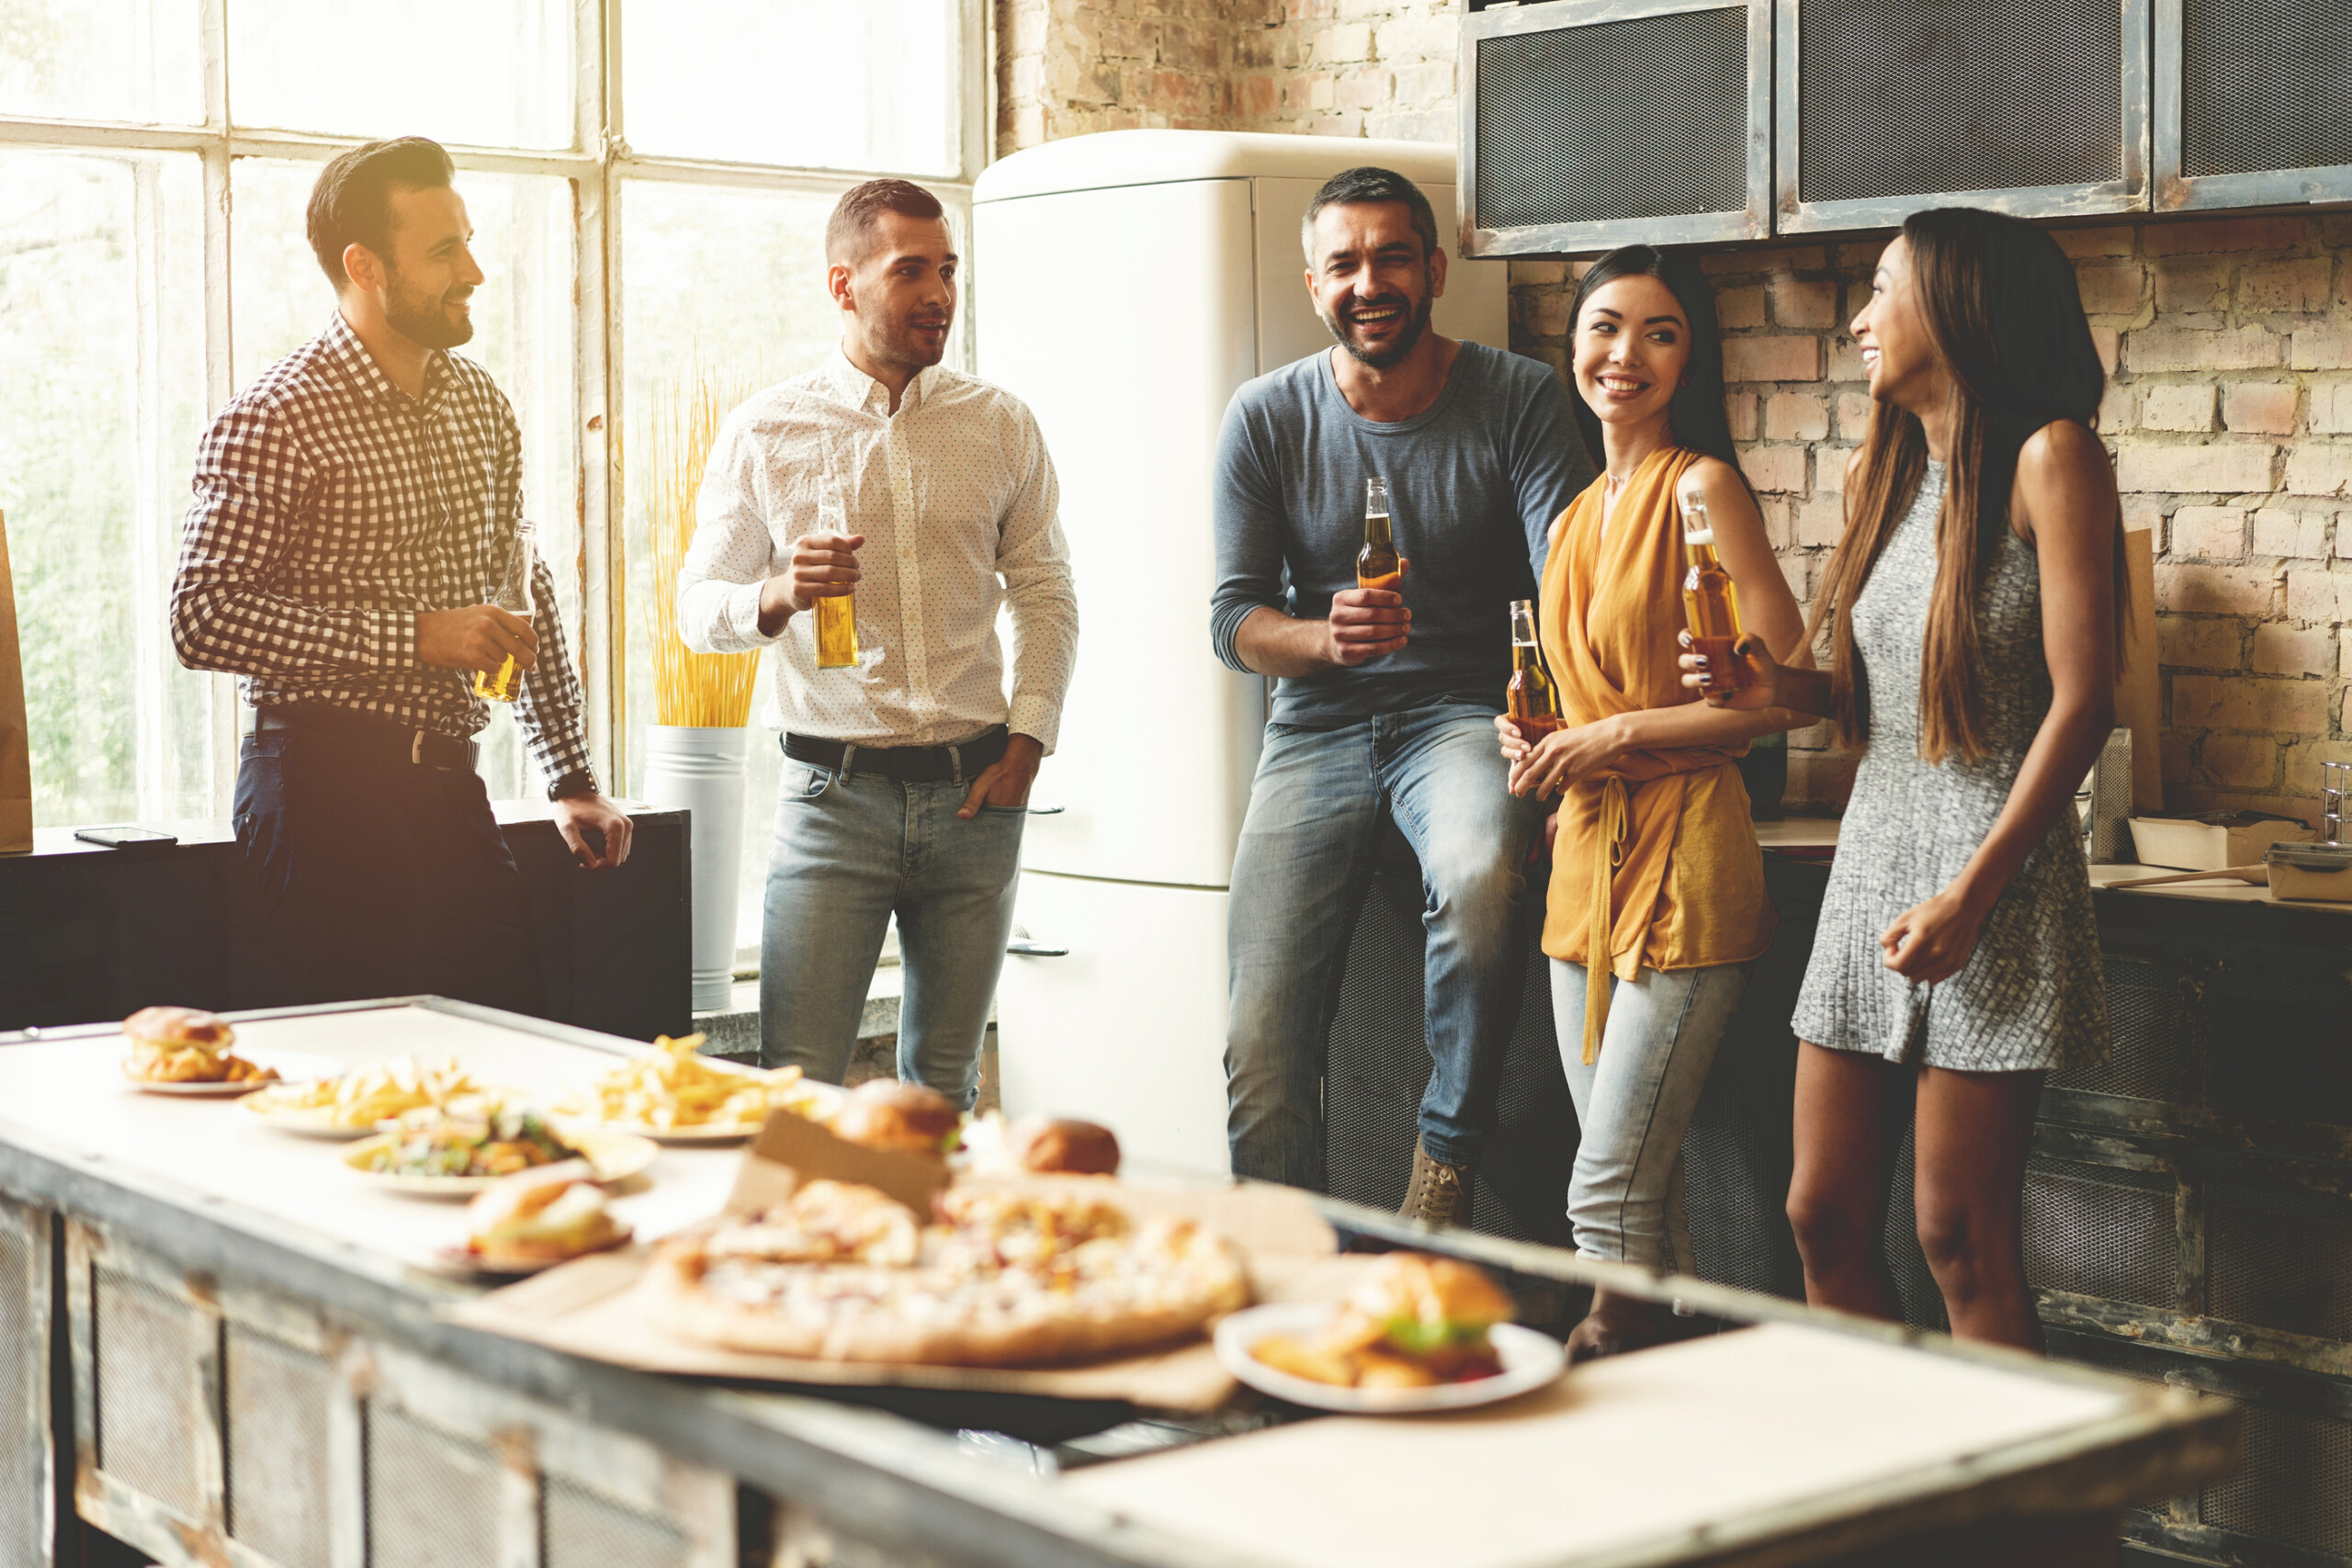 Group of people enjoying food and drinks in kitchen